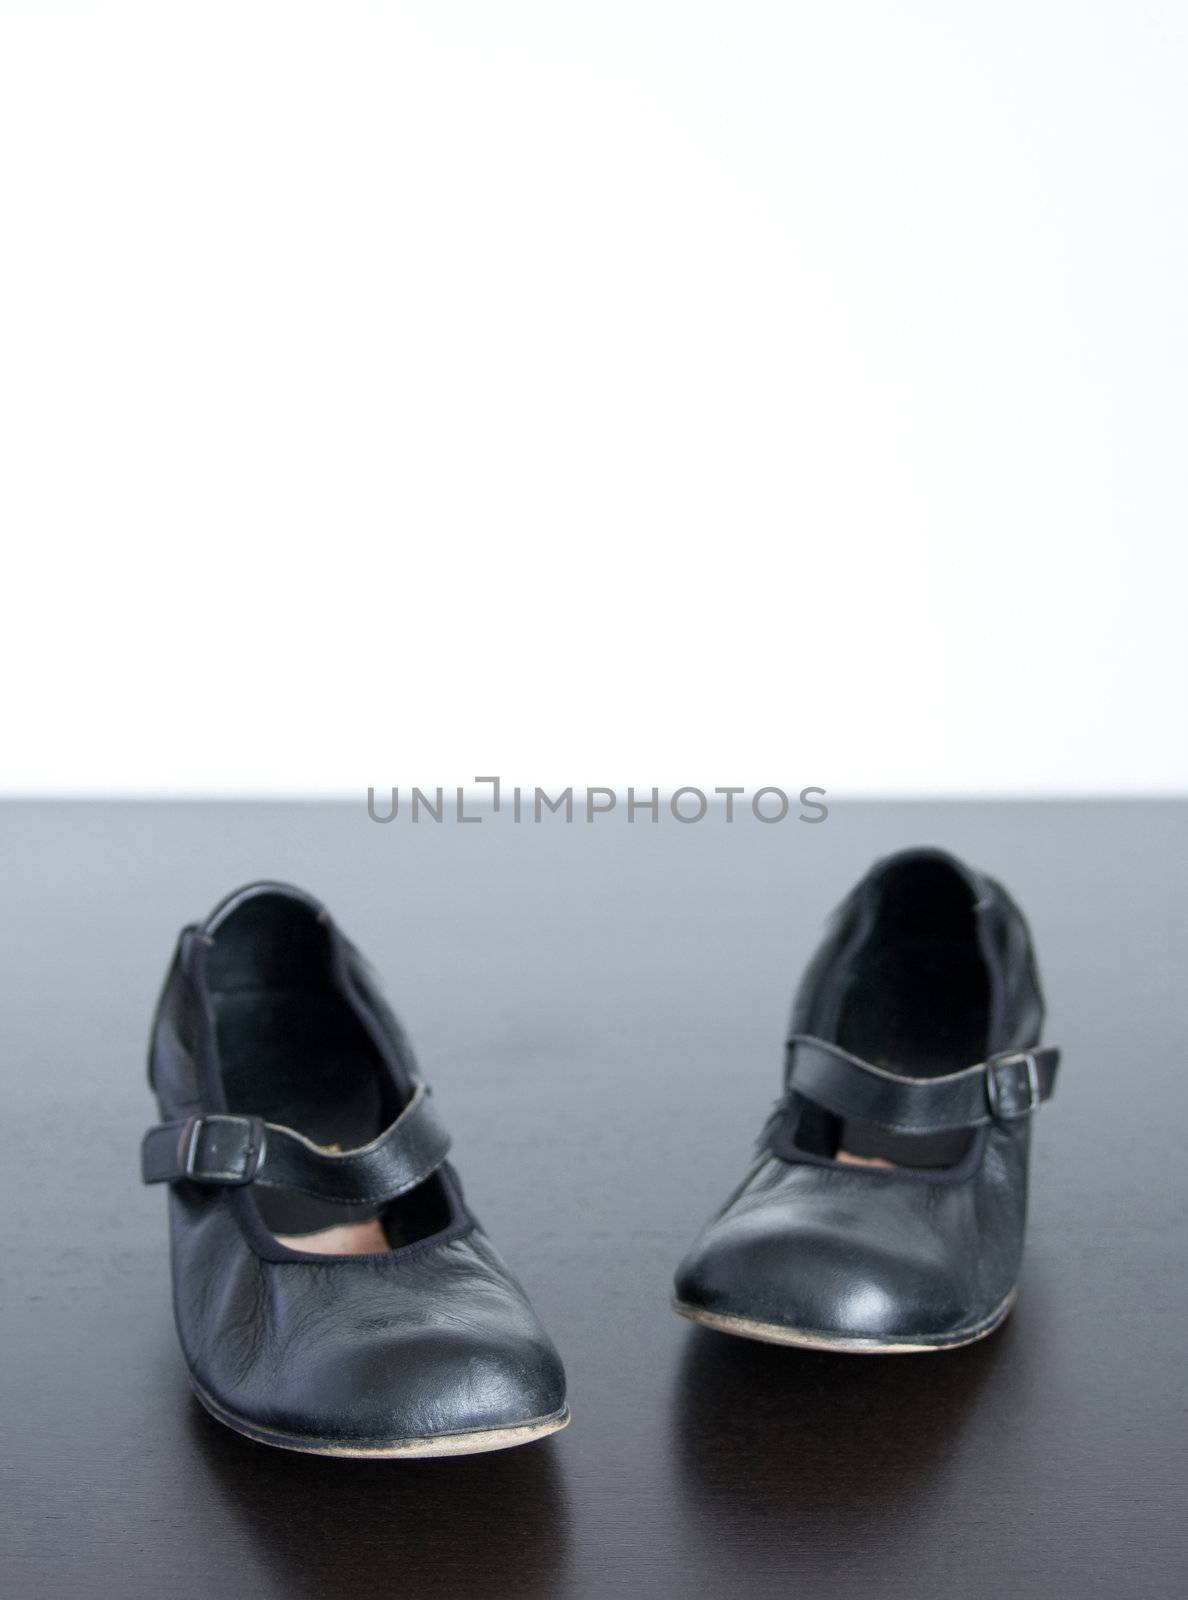 Black shoes on wooden surface, wish copy-space behind.